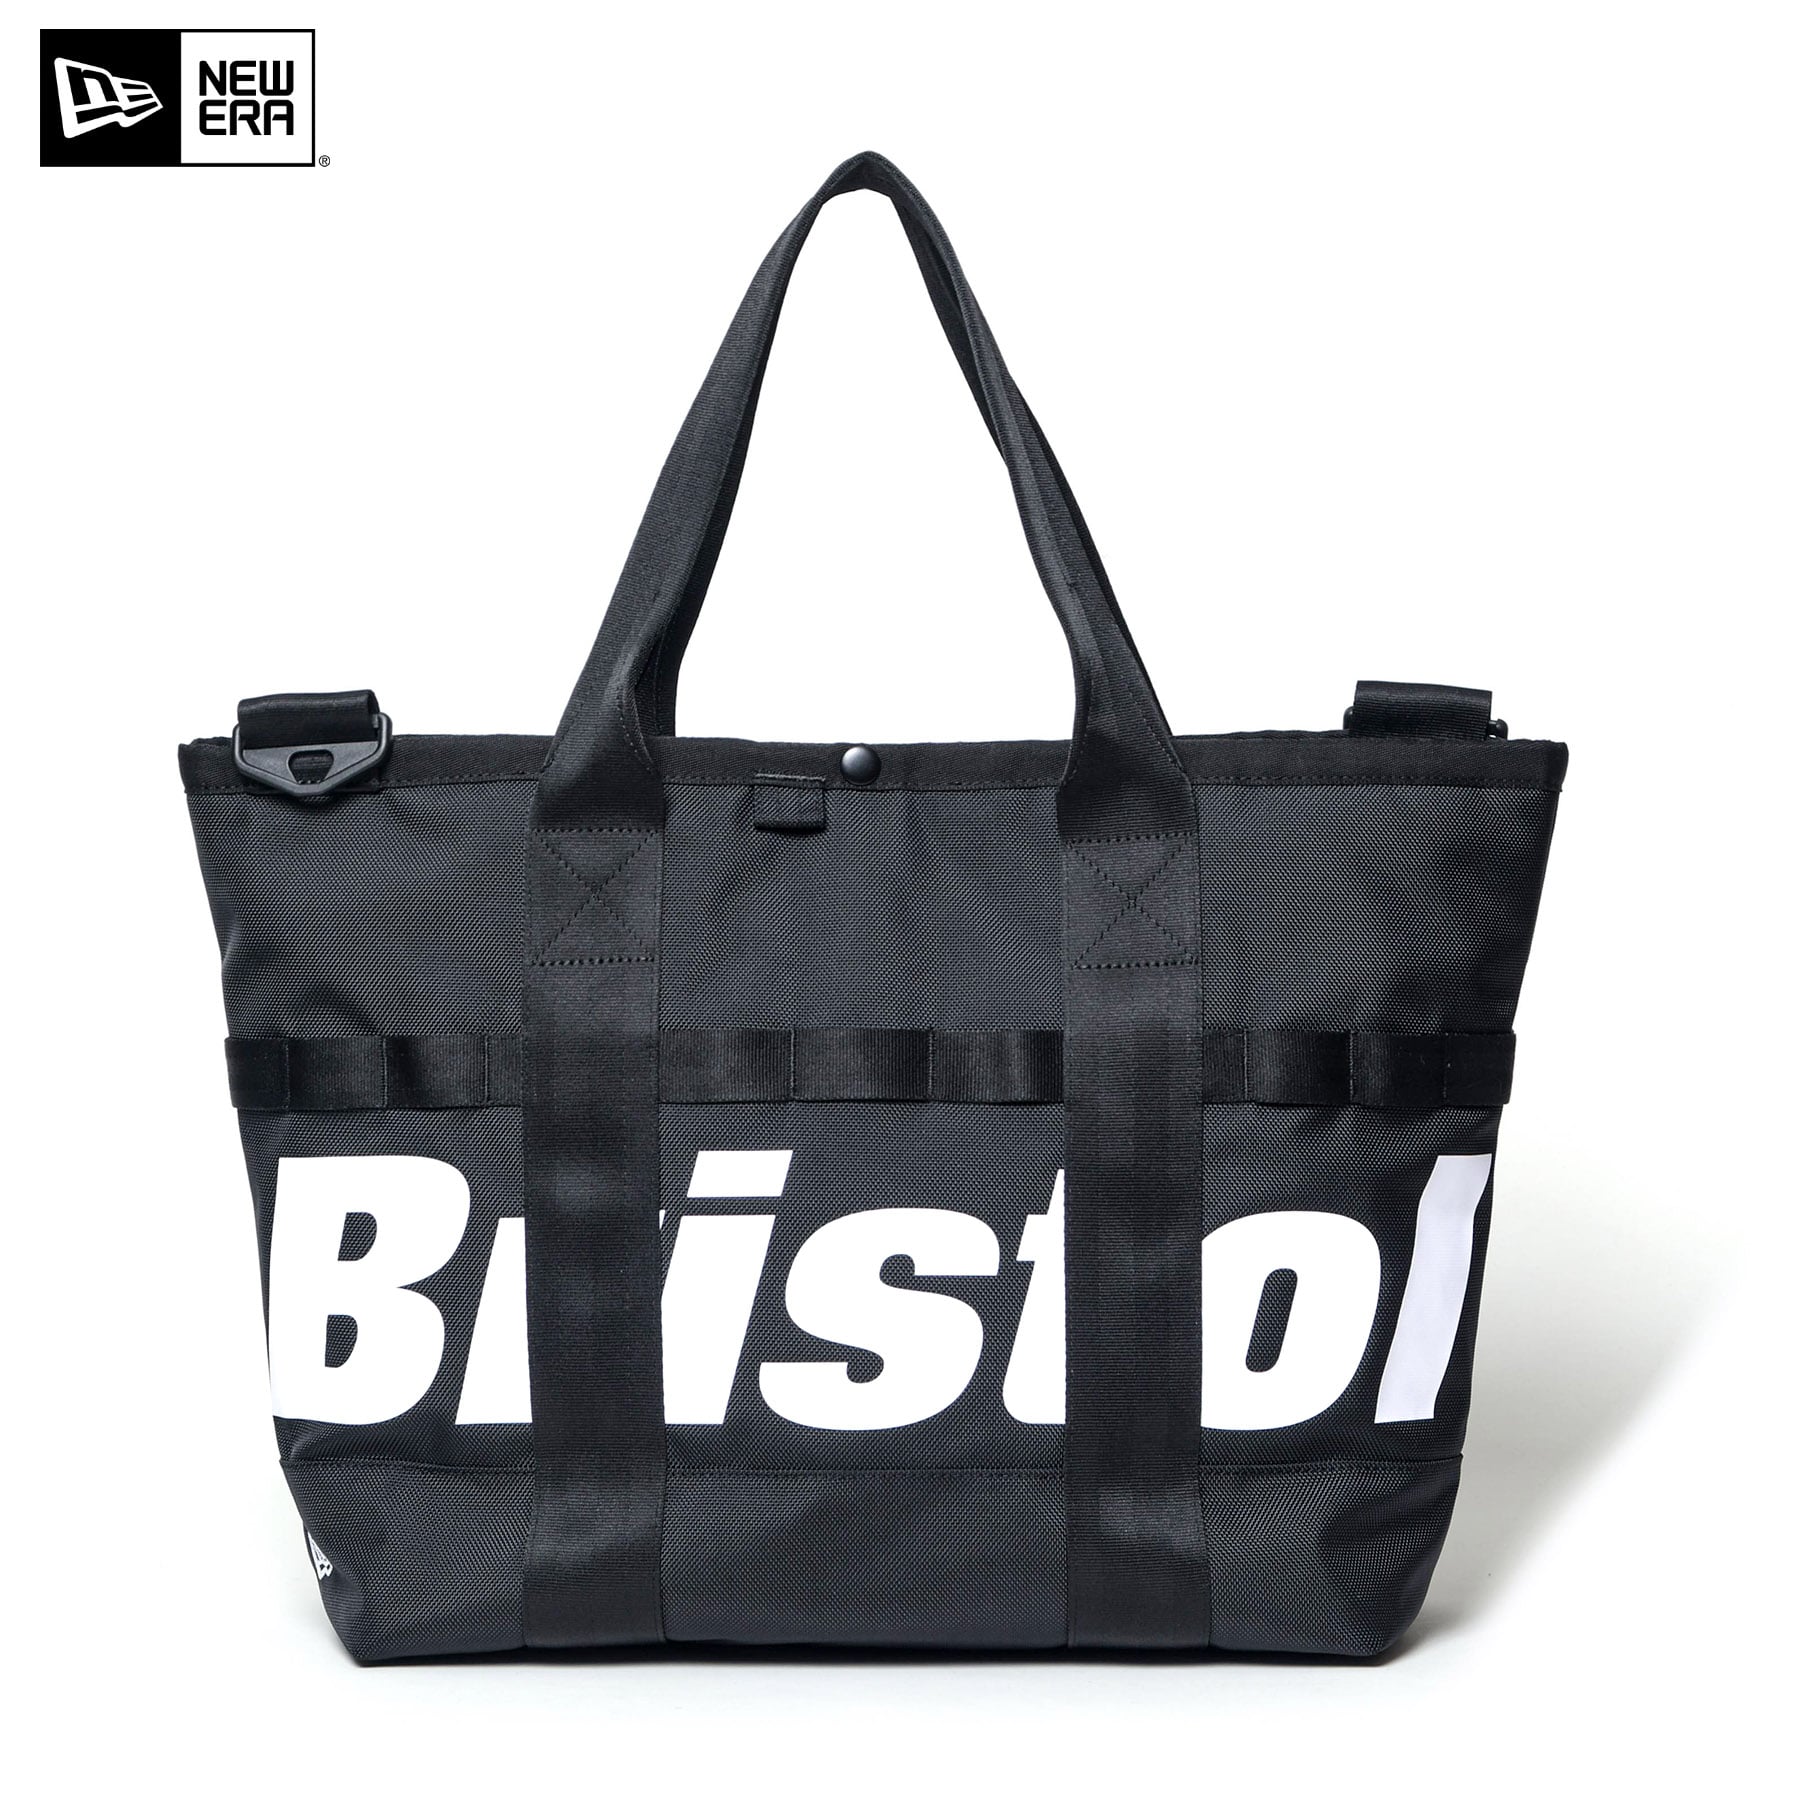 SMALL TOTE BAG fcrb 23ss ブリストル トートバッグ 1-